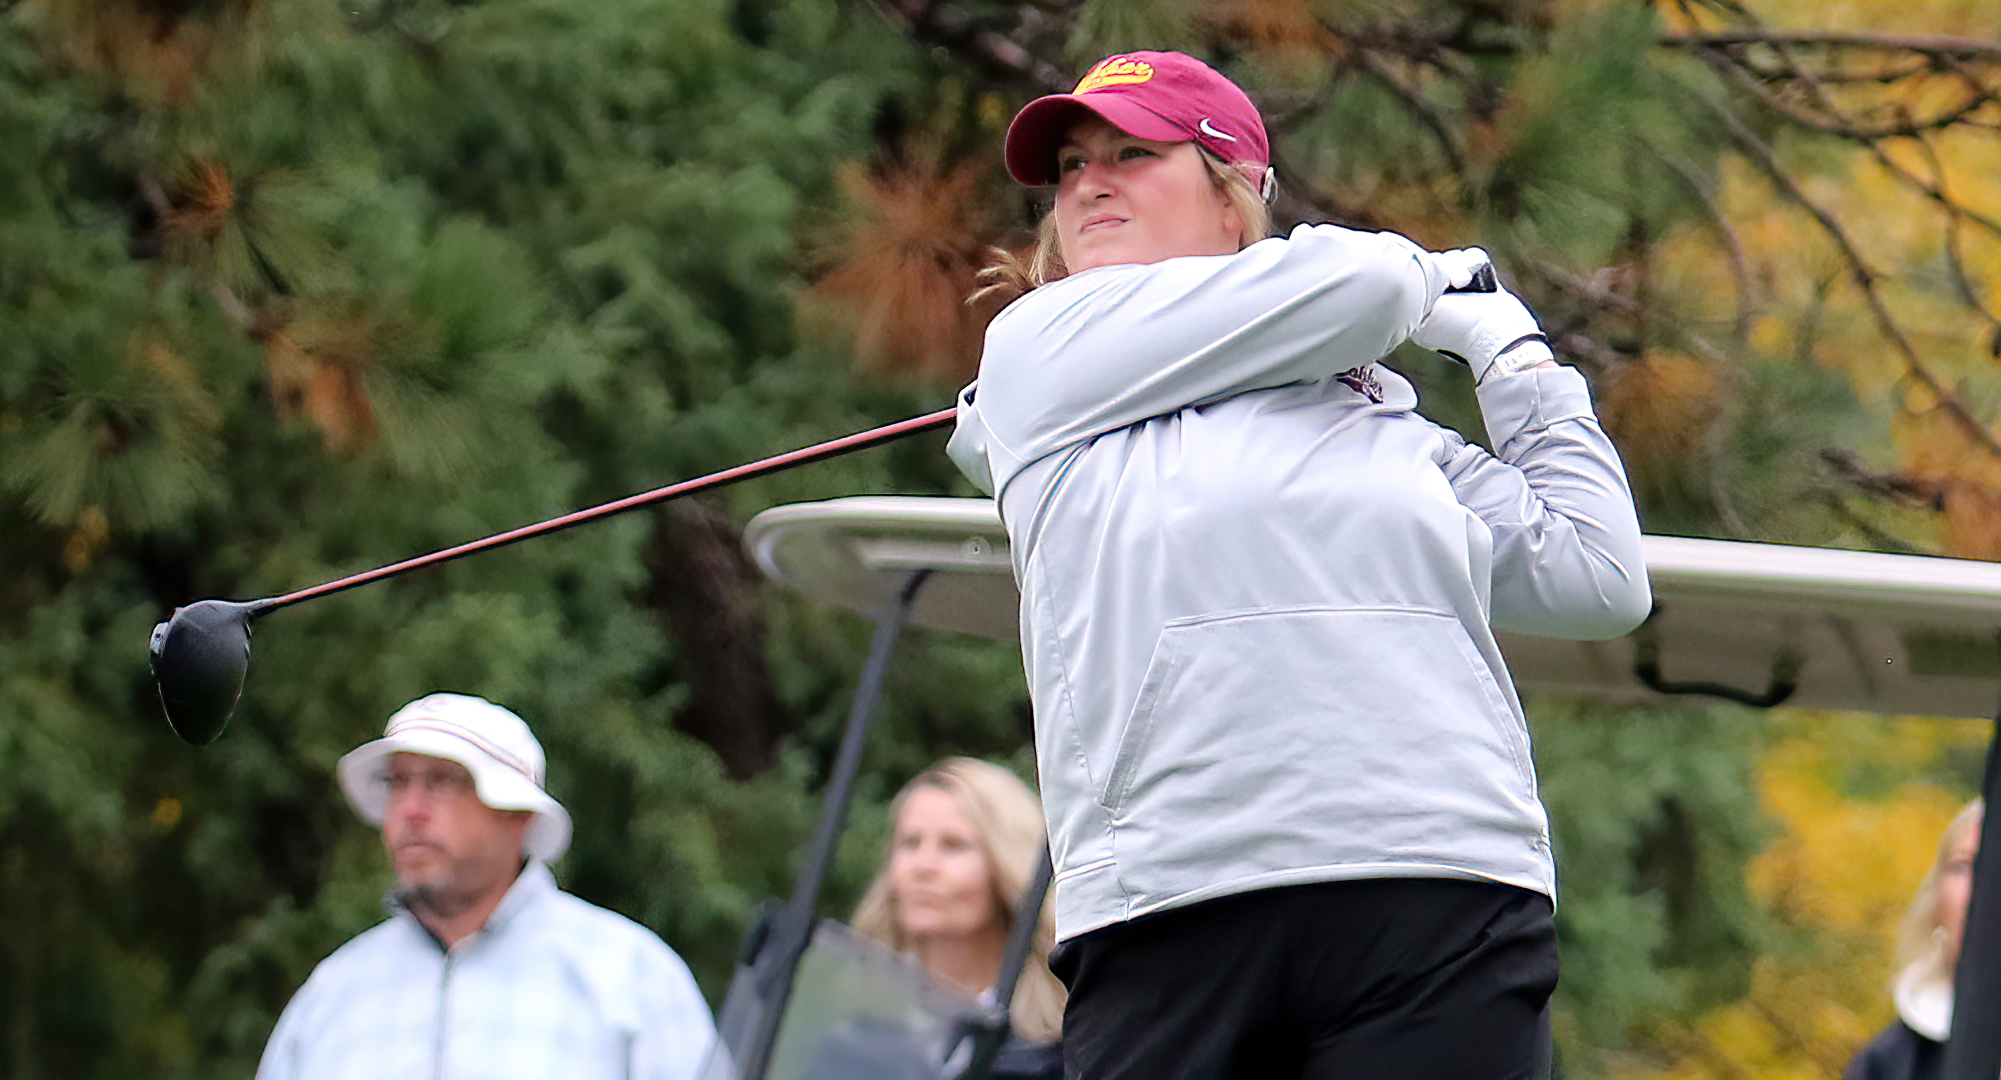 Lillie Kirchner tees off on Day 2 at the St. Kate's Invite. She came away with the best 2-round total of her career. (Pic courtesy of Don Stoner)